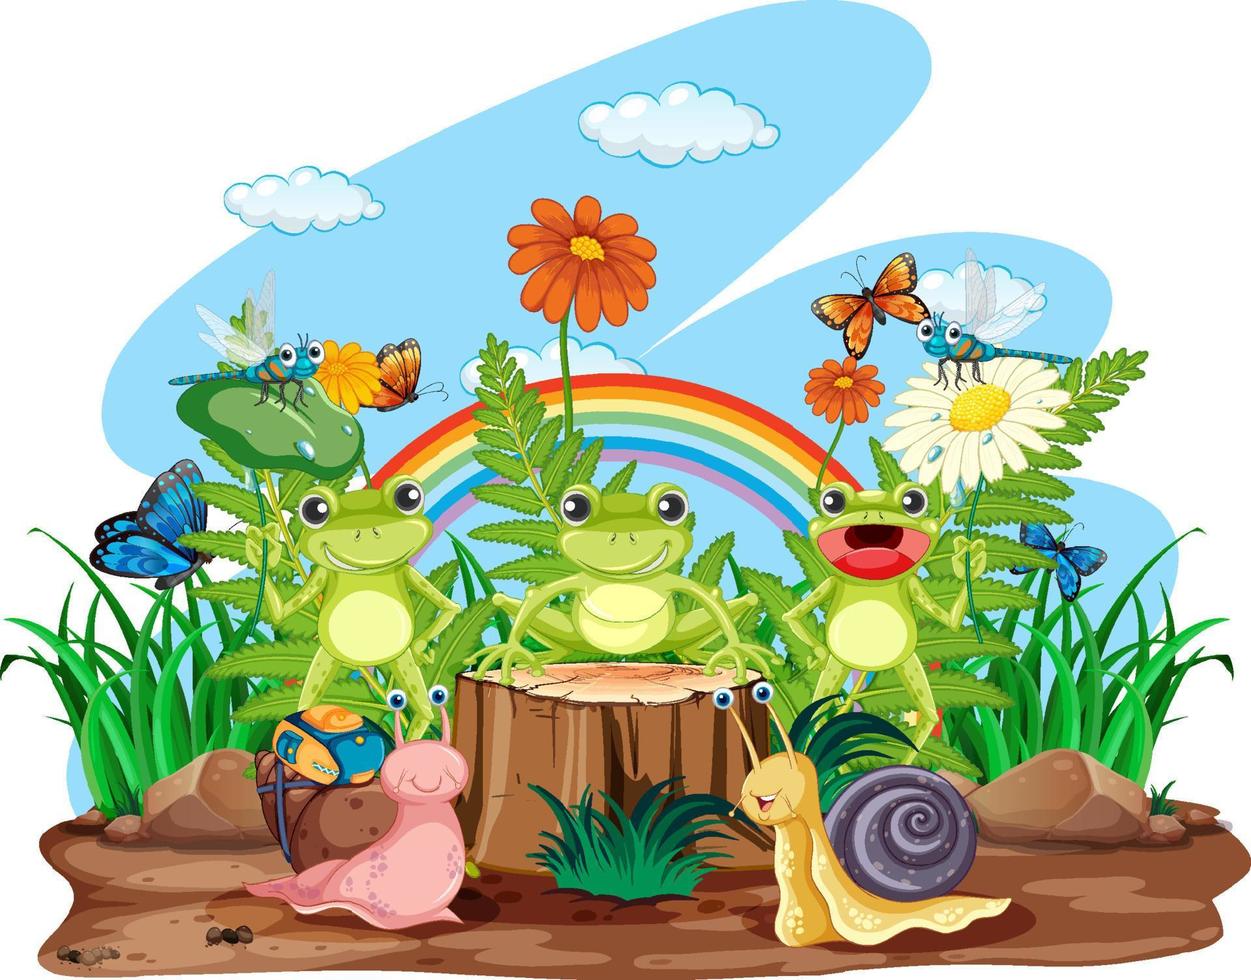 Frog living in nature vector